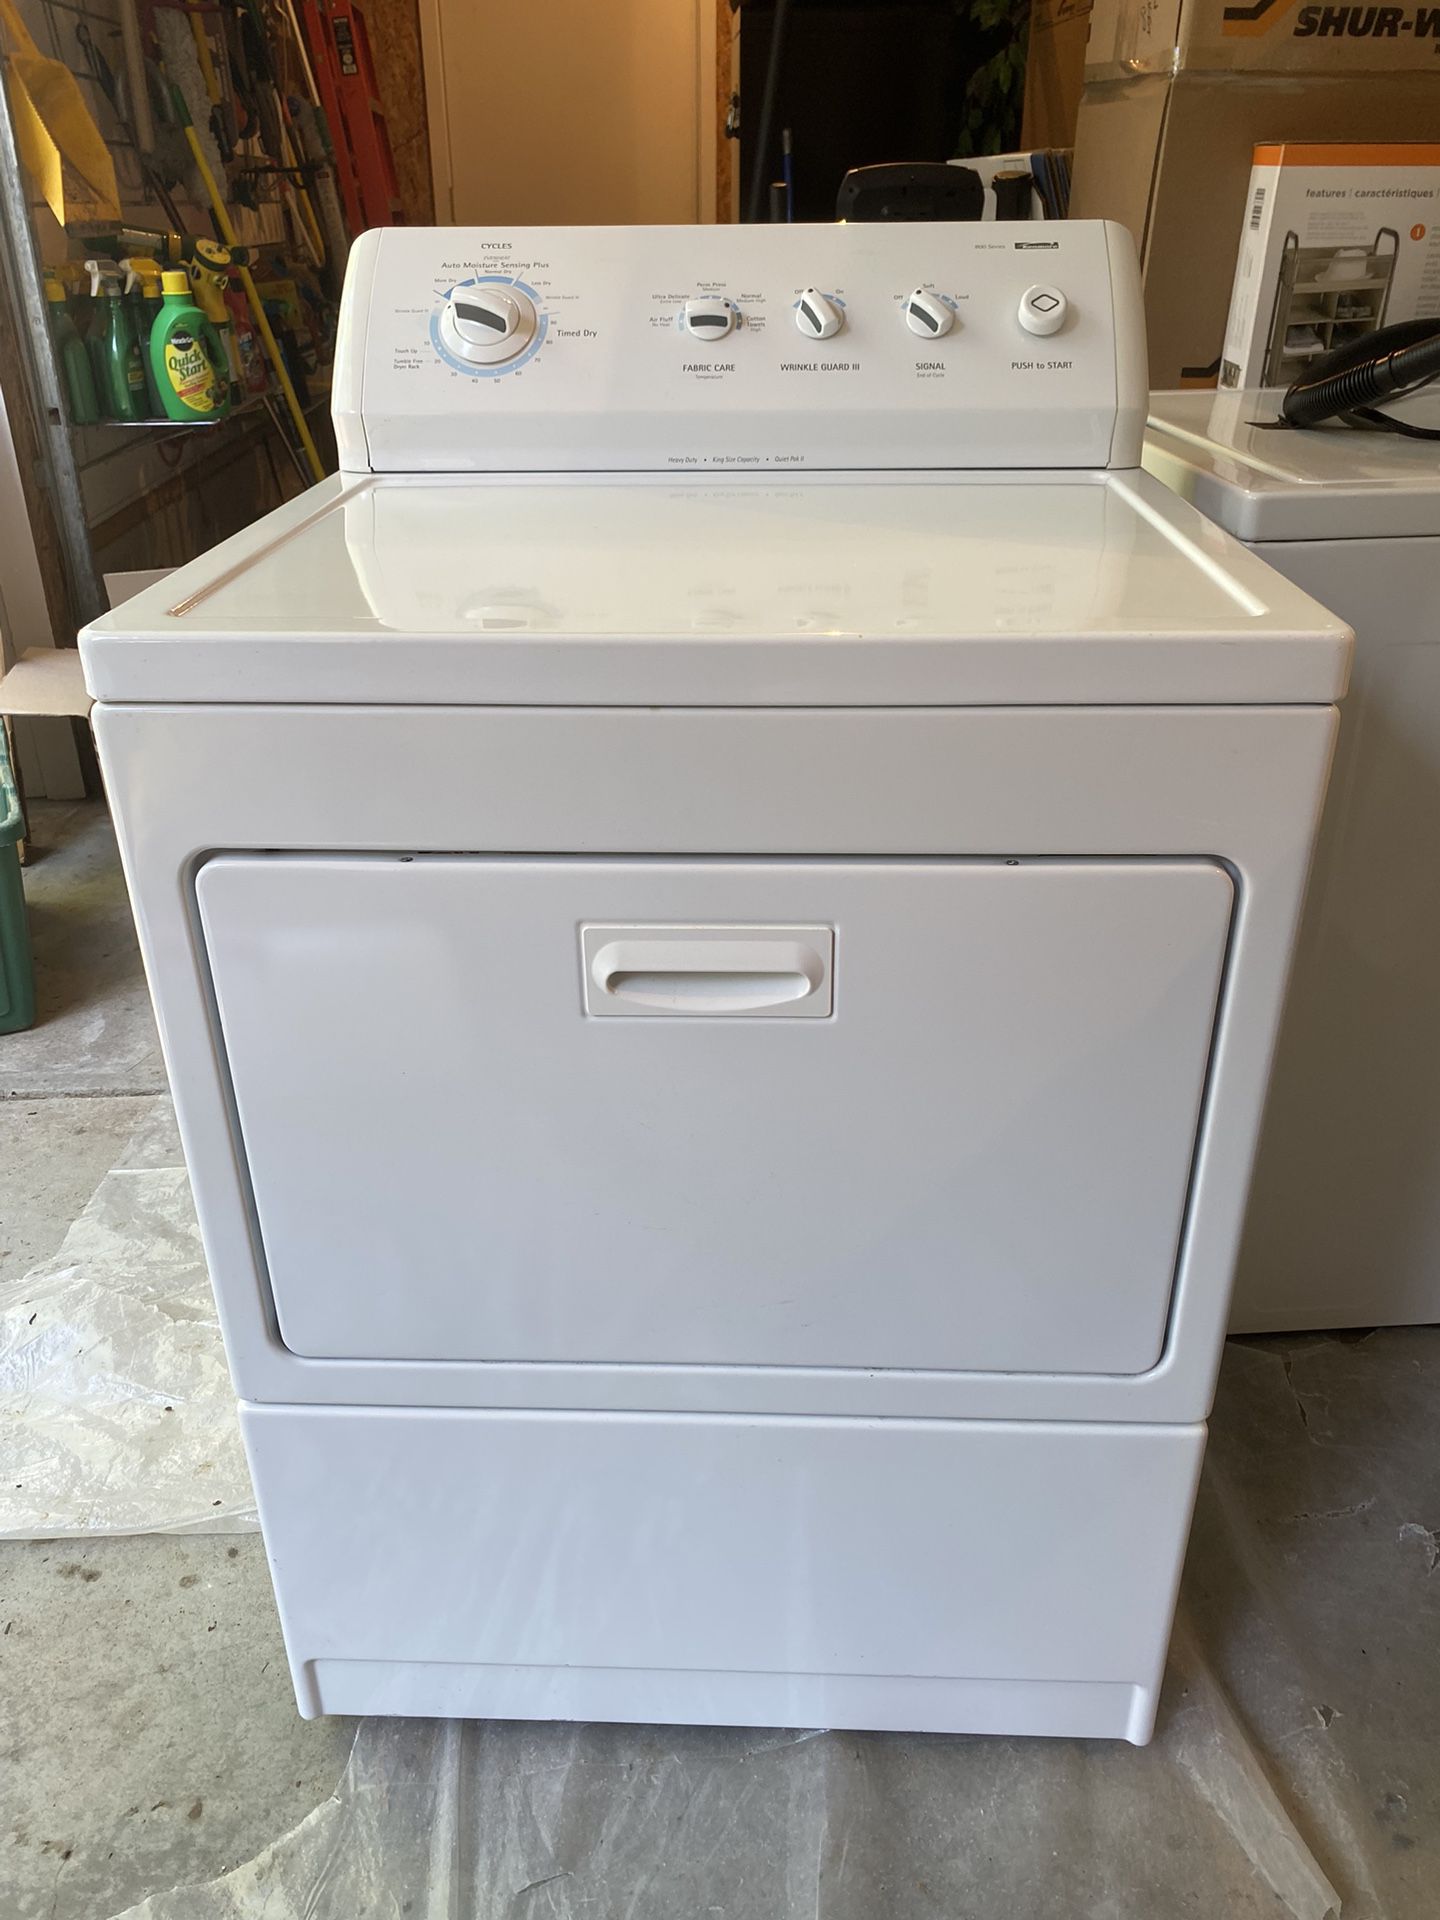 Maytag Washer AND Dryer